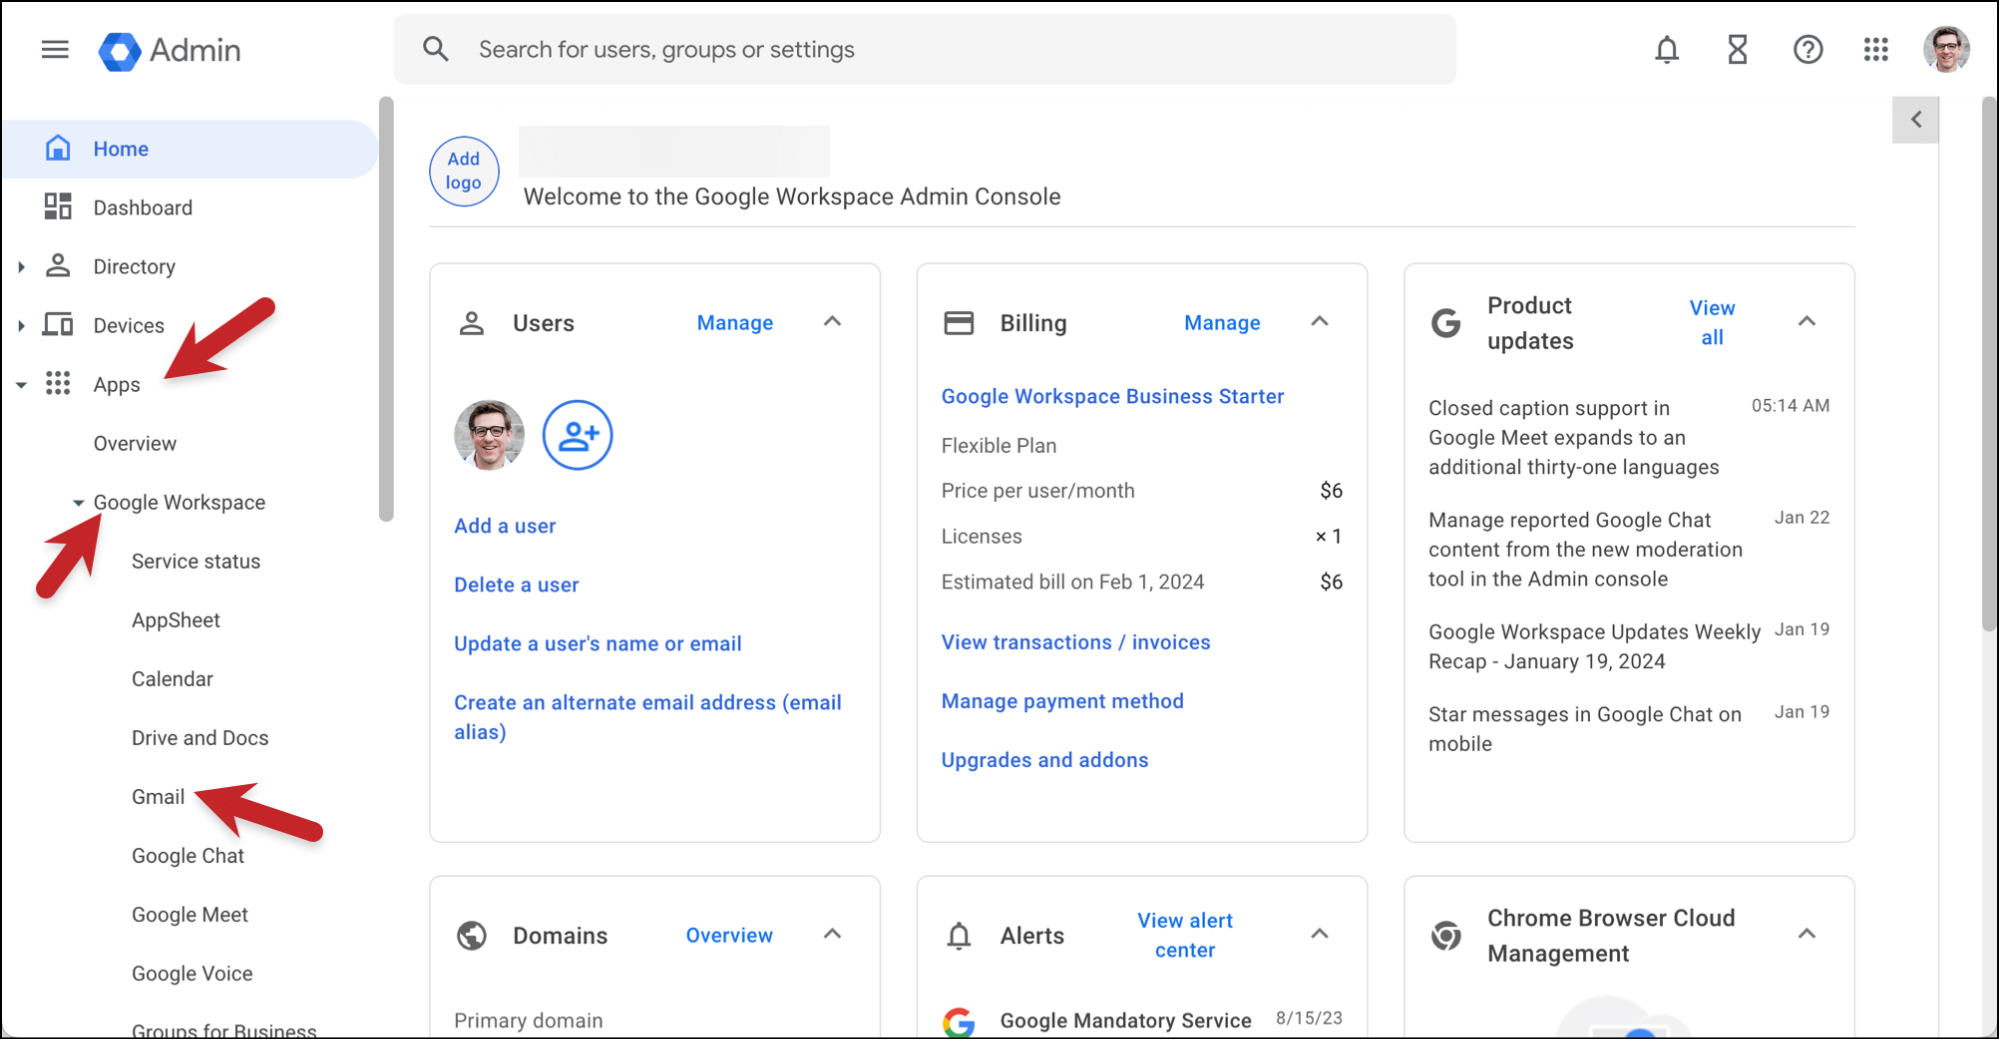 Where to find the Gmail settings in Google Admin